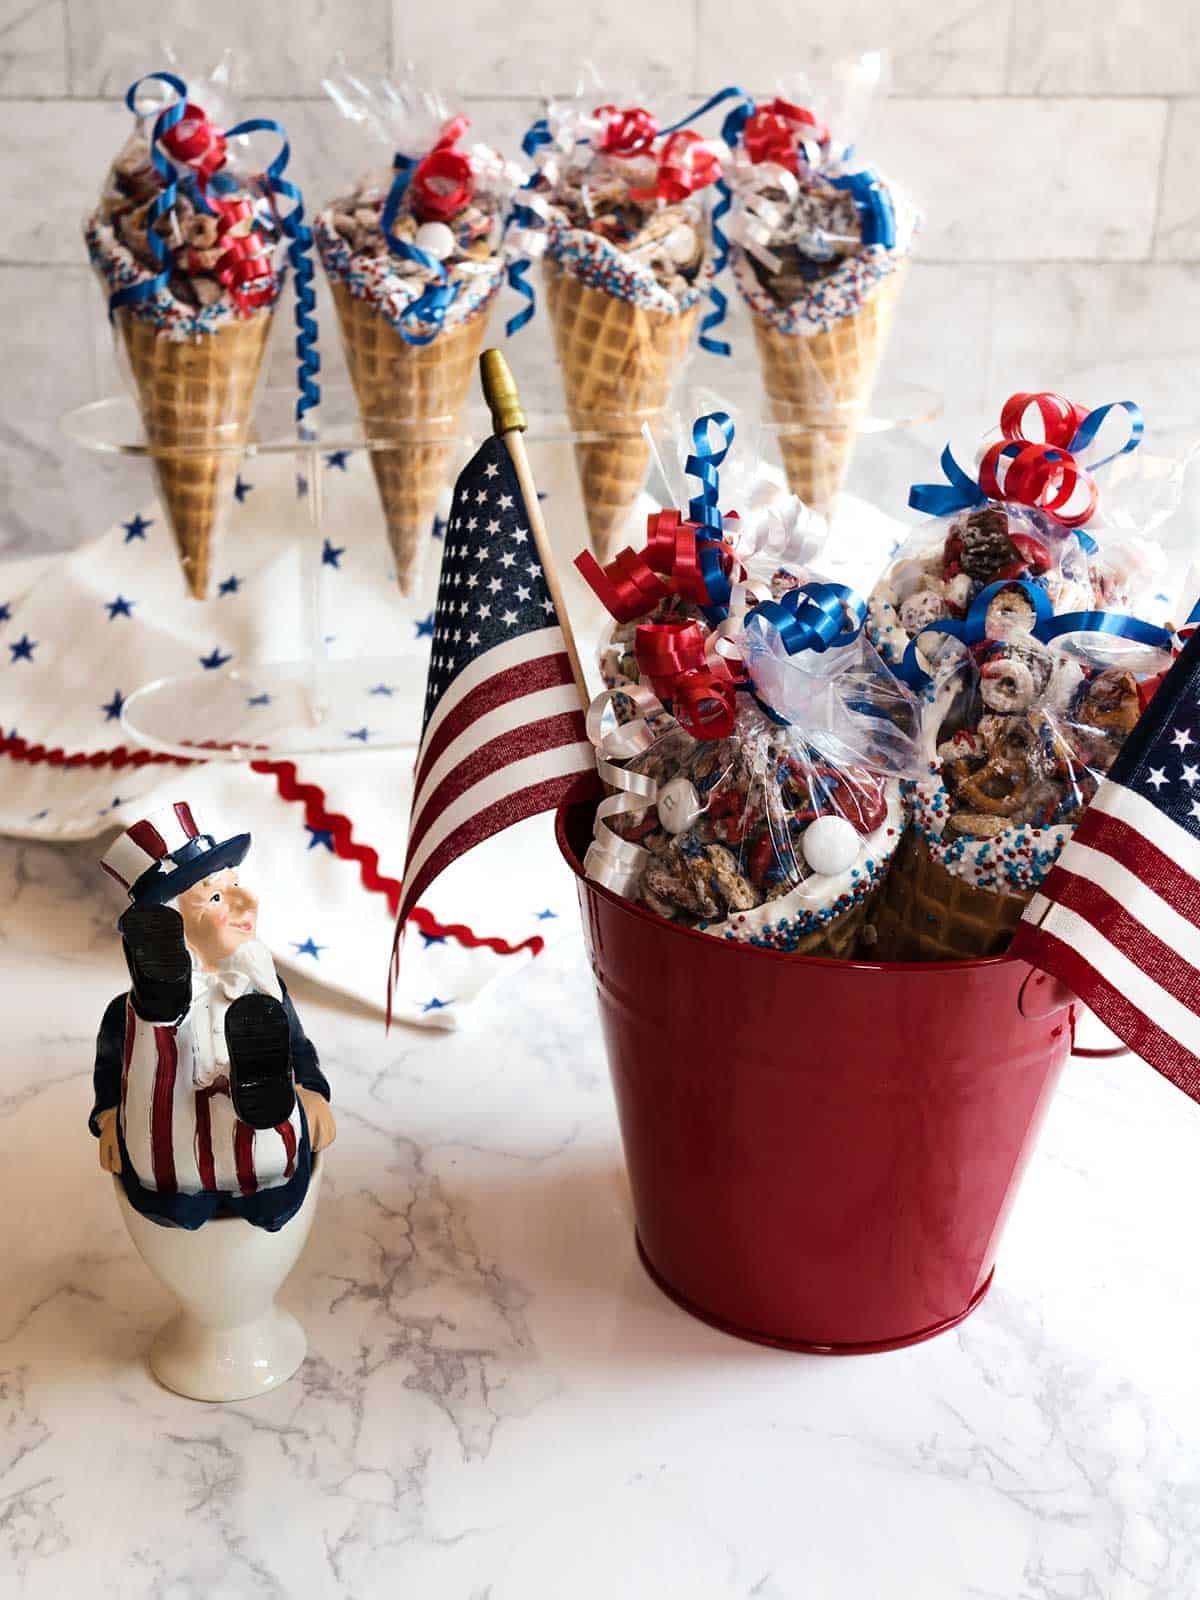 Ice cream waffle cones full of a red, white and blue snack mix.